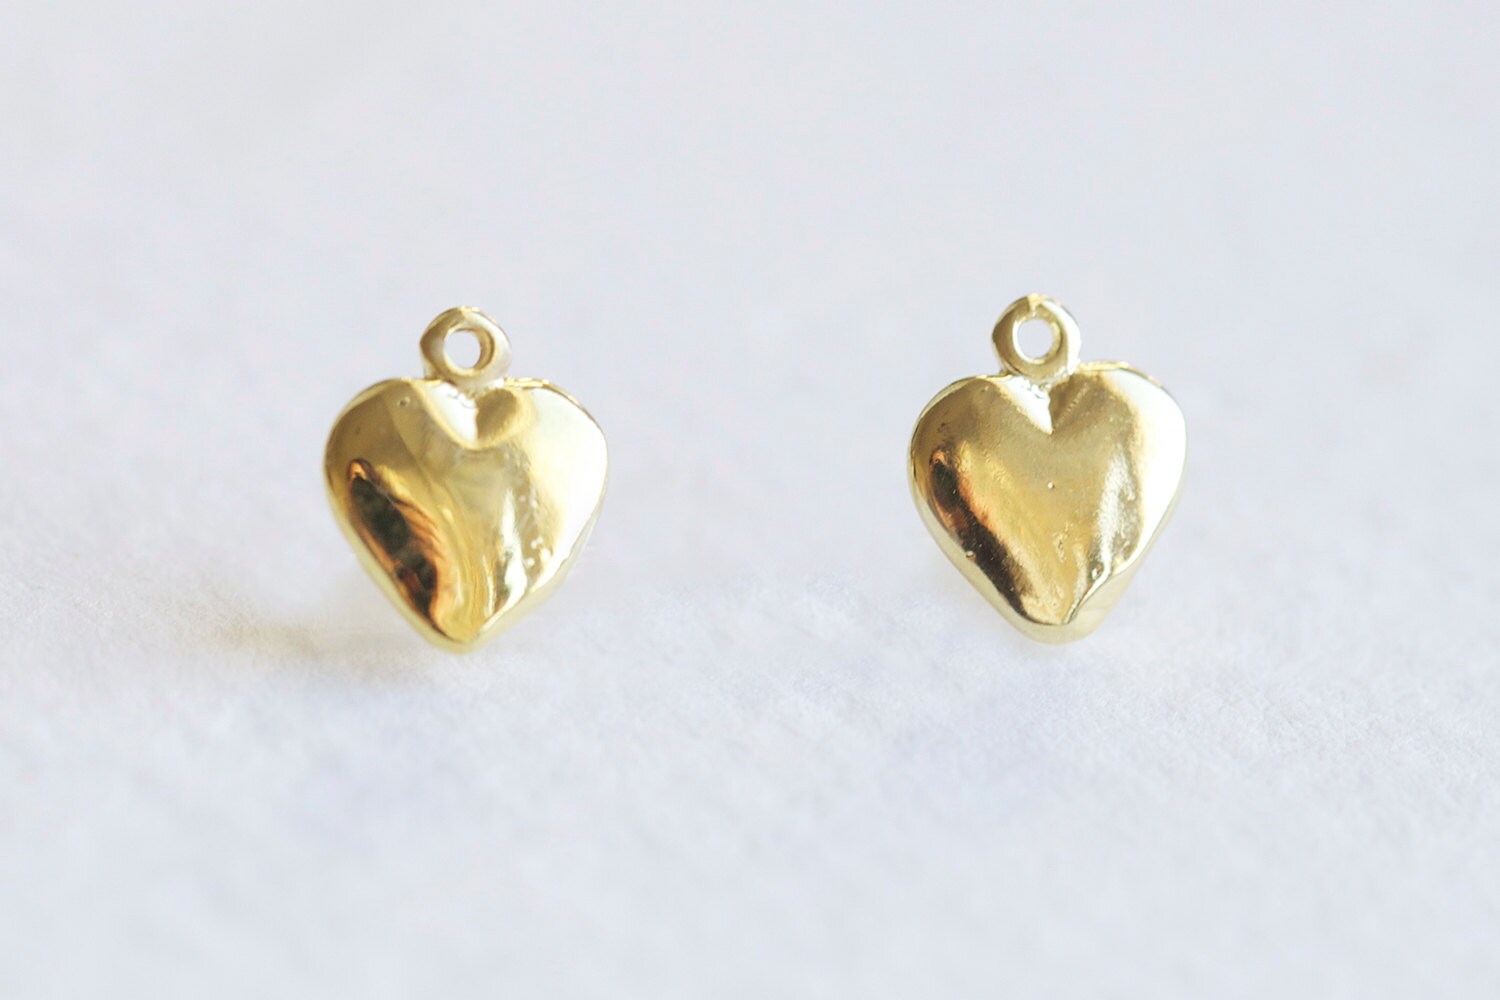 Vermeil Gold Small Puffy Heart Charms 2 Pcs Small Dainty - Etsy